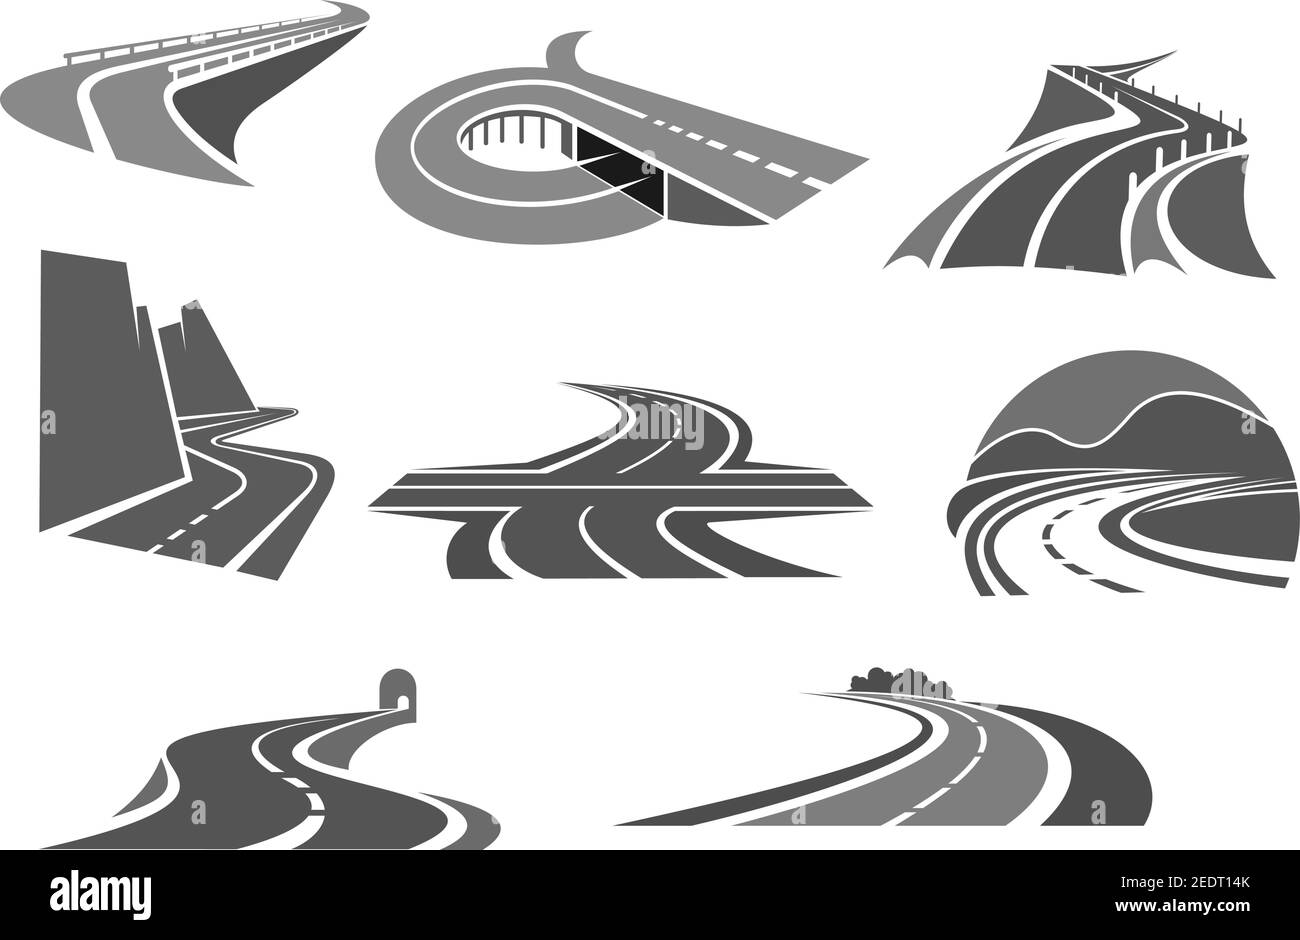 Highways and motorway roads vector icons. Symbols for express way building or construction company or transportation safety and repair service, travel Stock Vector